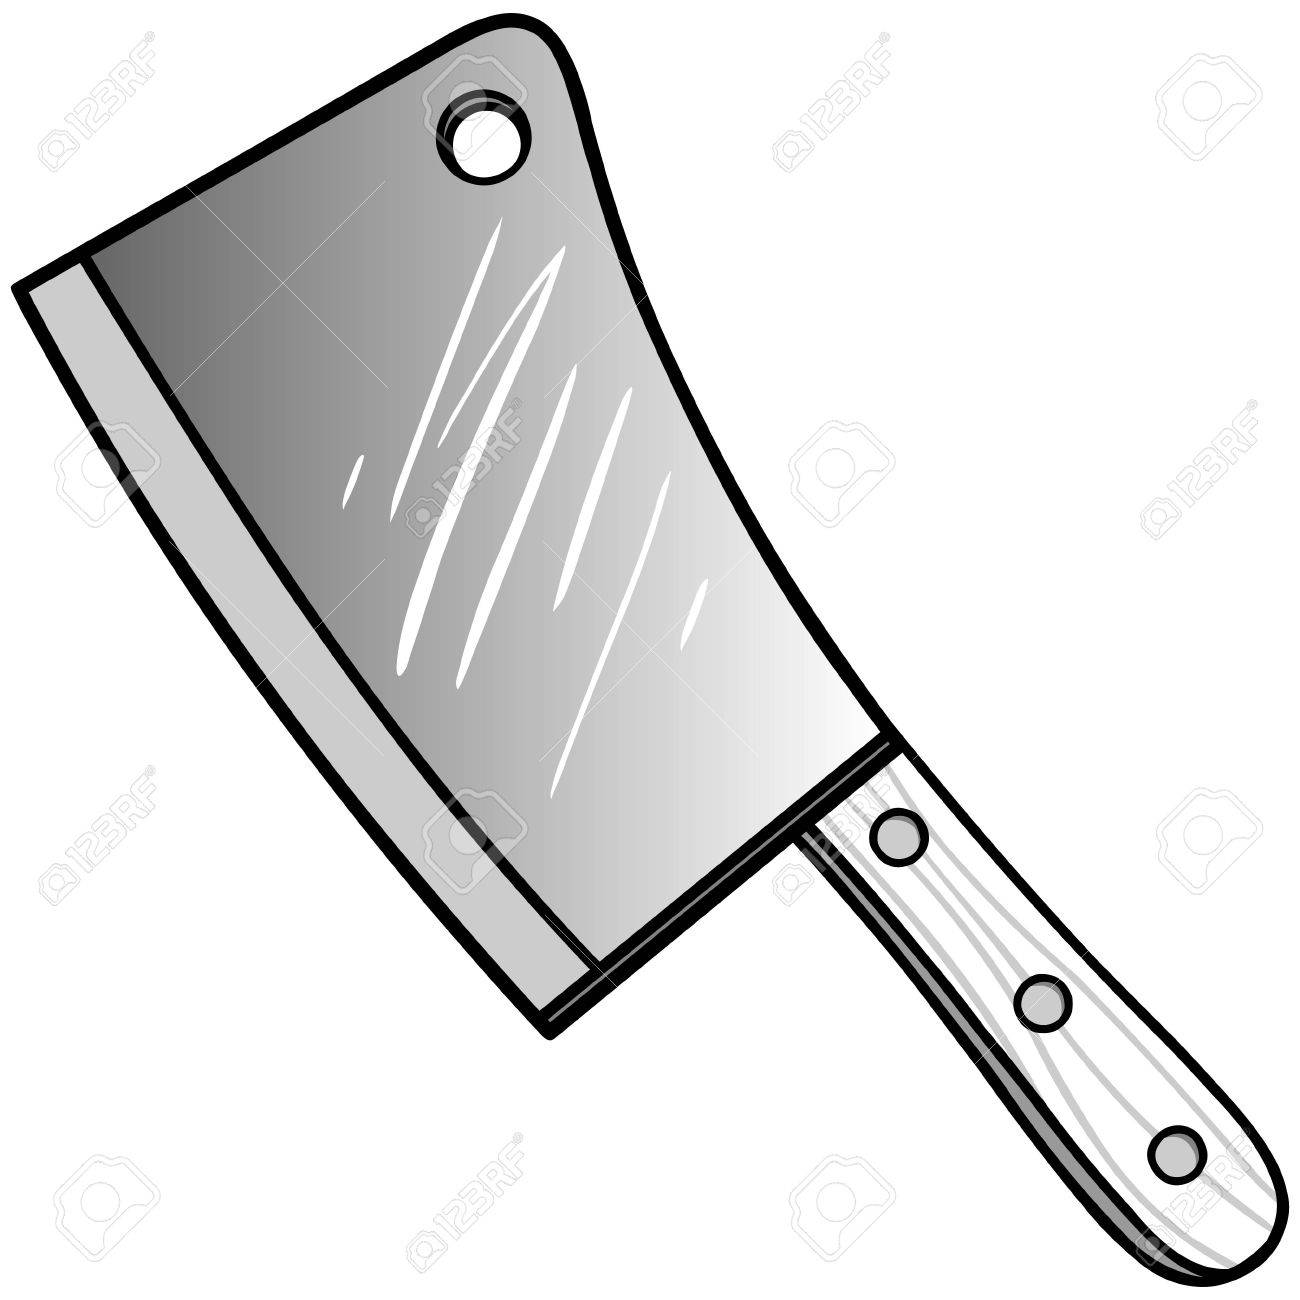 Butcher knife clipart 3 » Clipart Station.